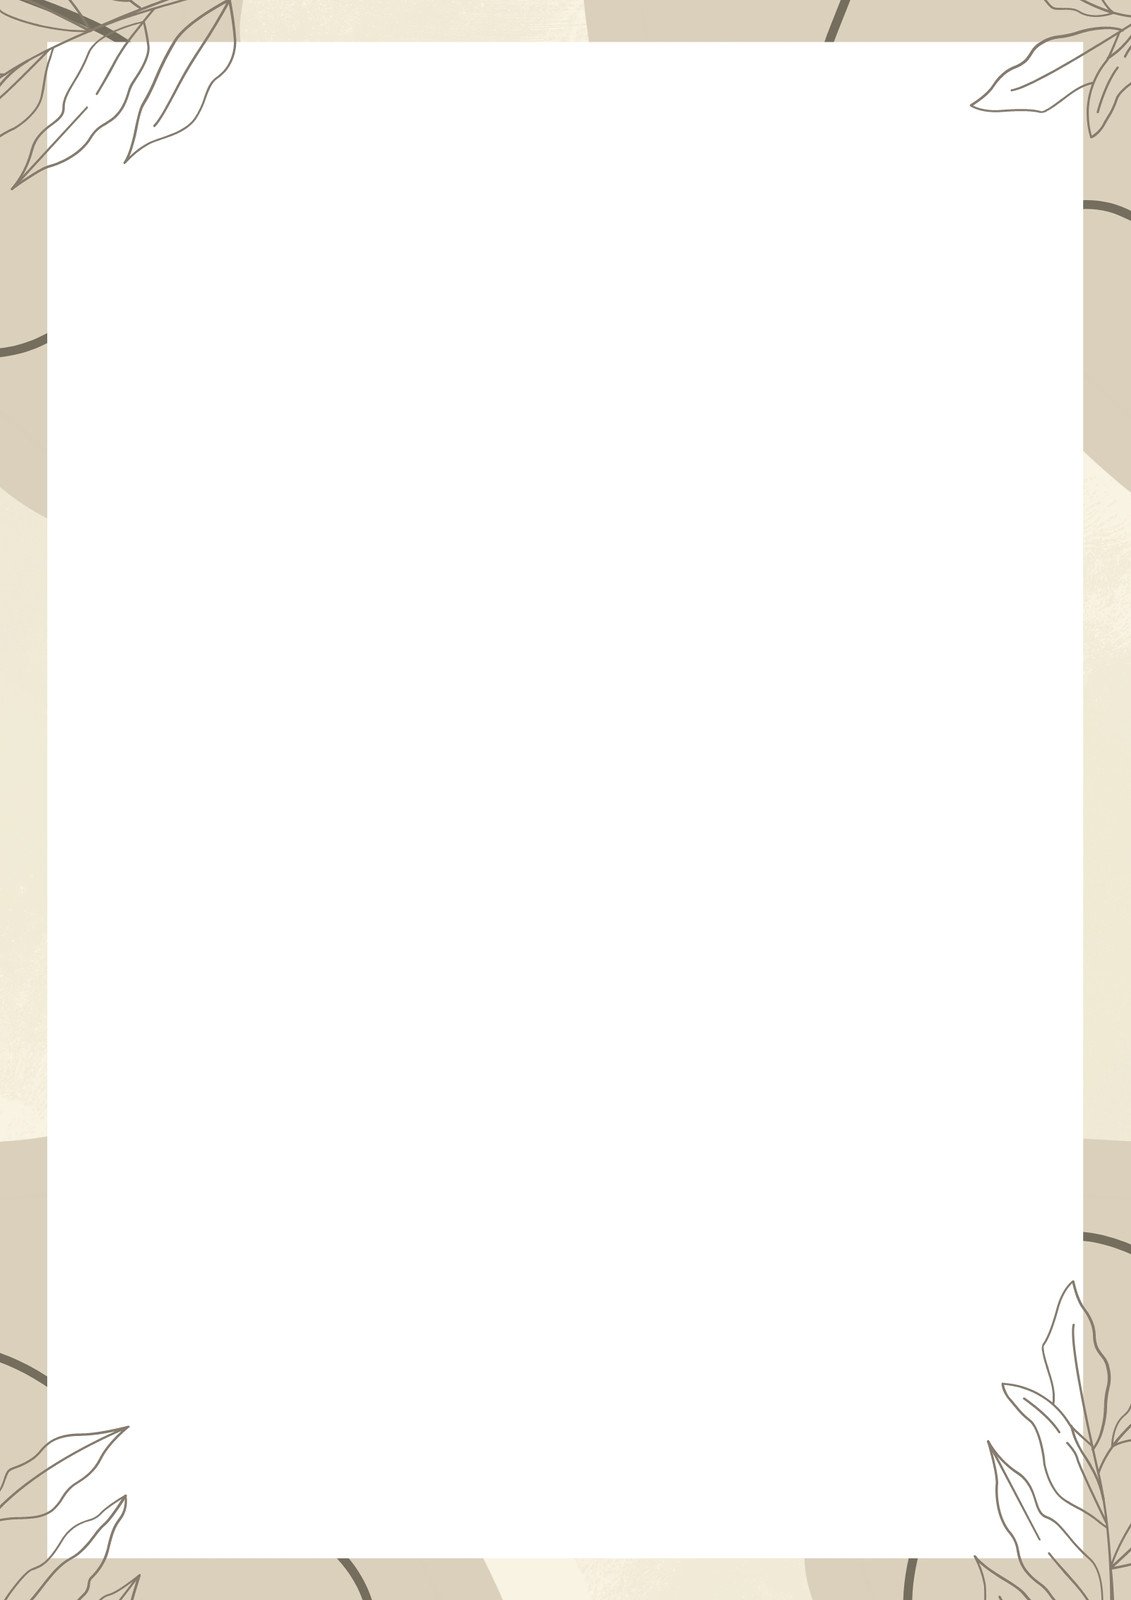 Free Printable Page Border Templates You Can Customize, 52% OFF